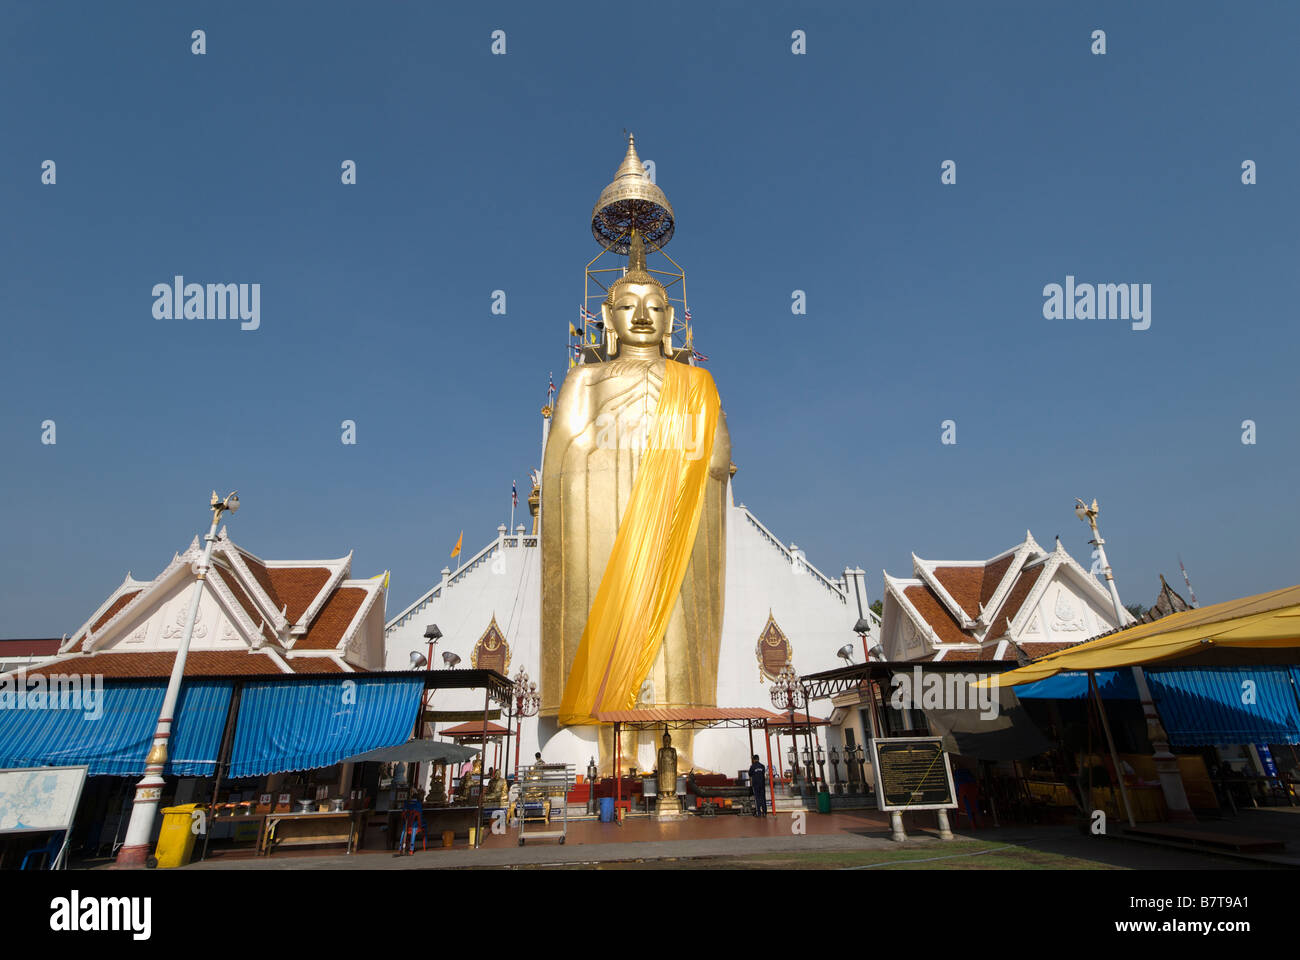 32m golden standing buddha Buddhist temple Wat Intharavihan in Dusit district of Bangkok in Thailand Stock Photo